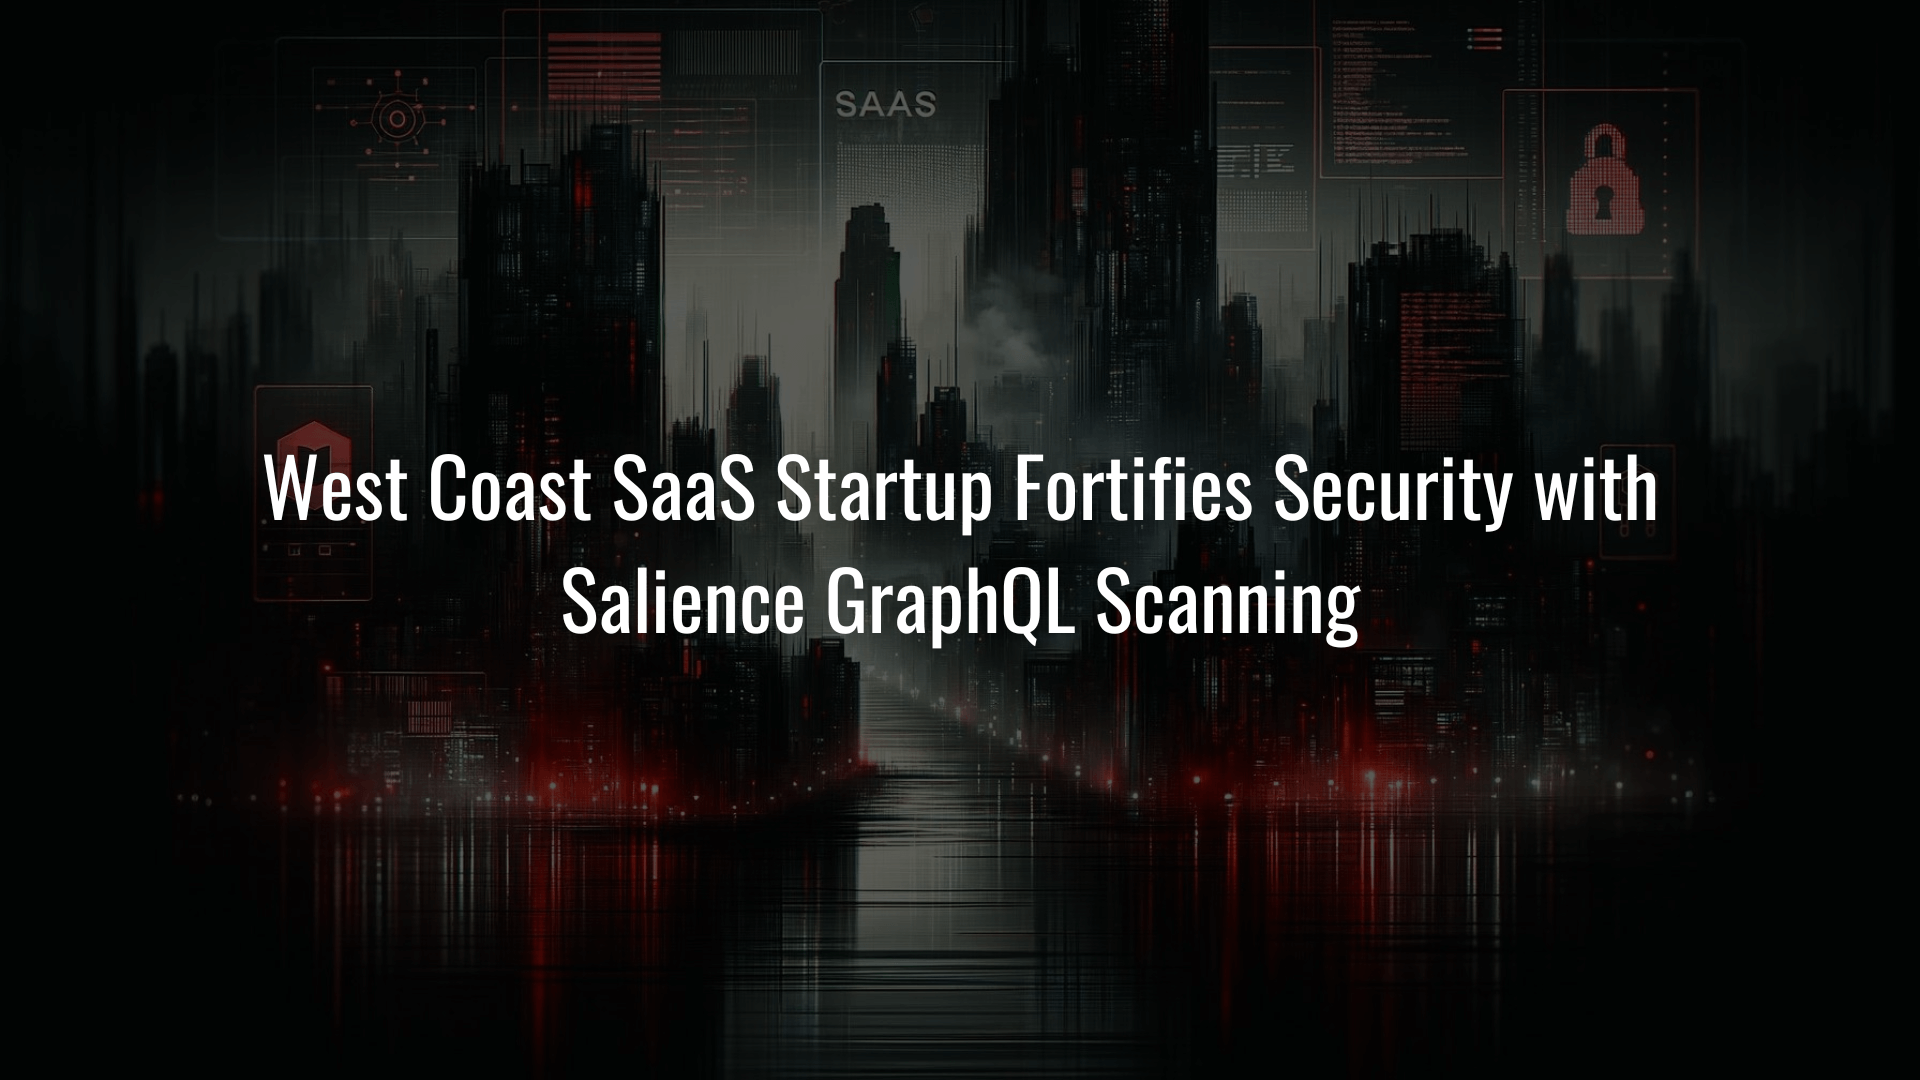 West Coast SaaS Startup Fortifies Security with Salience GraphQL Scanning to Prevent Data Leakage